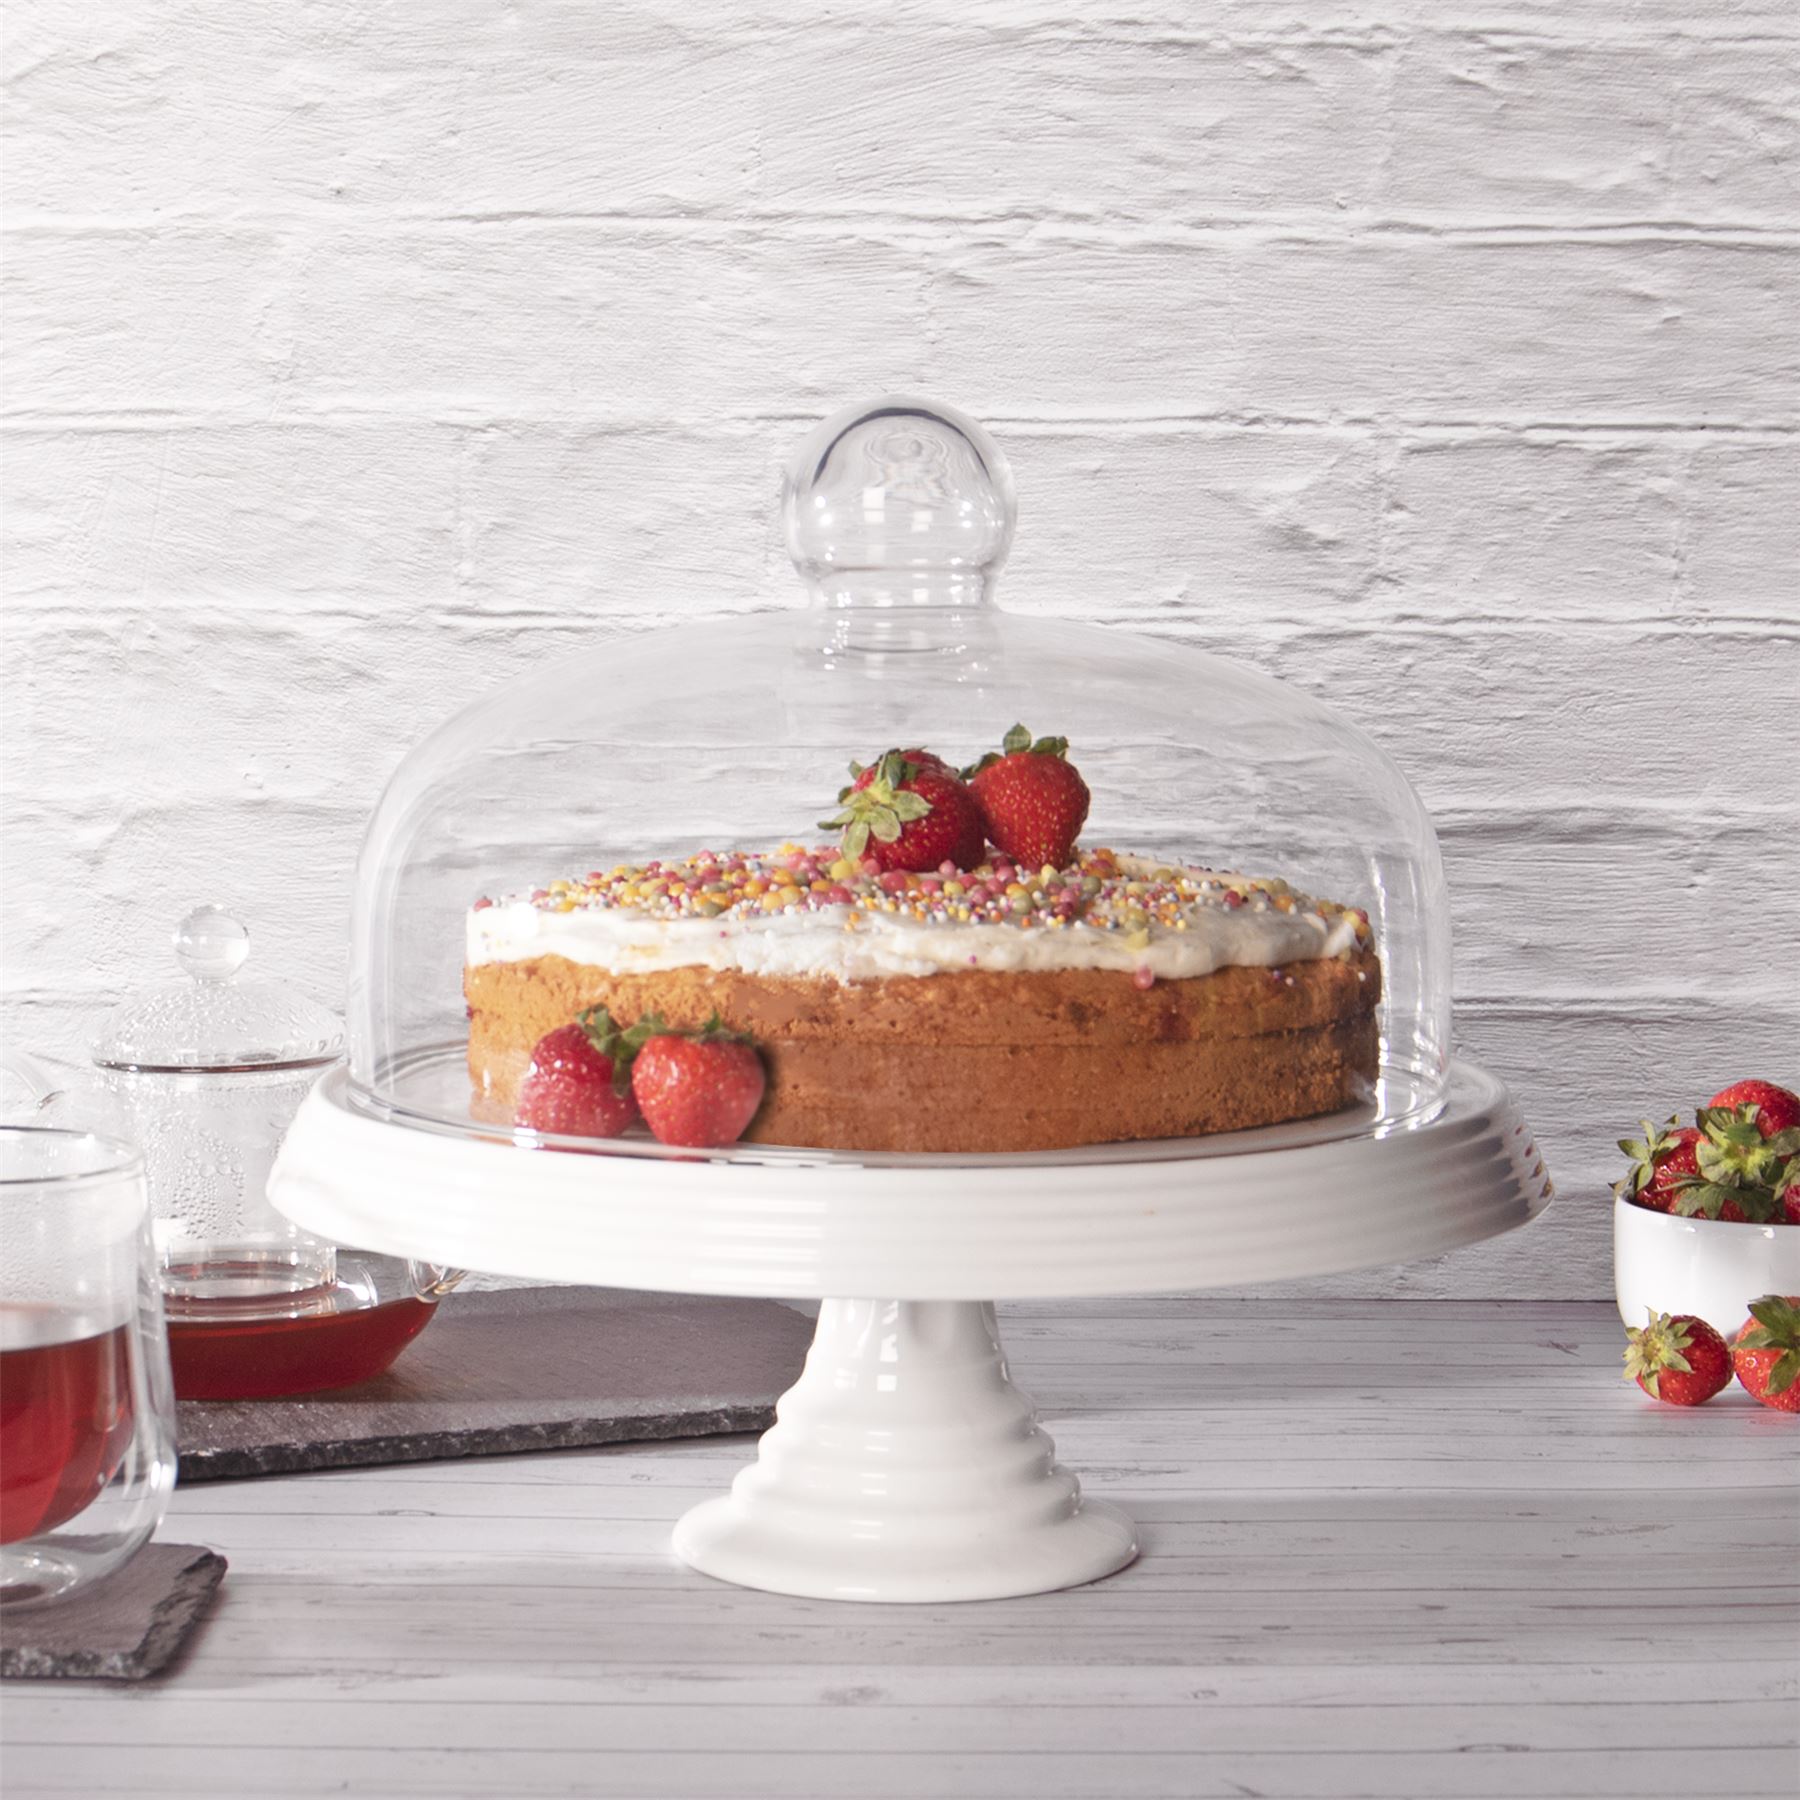 Ceramic Cake Stand with Glass Cover | M&W